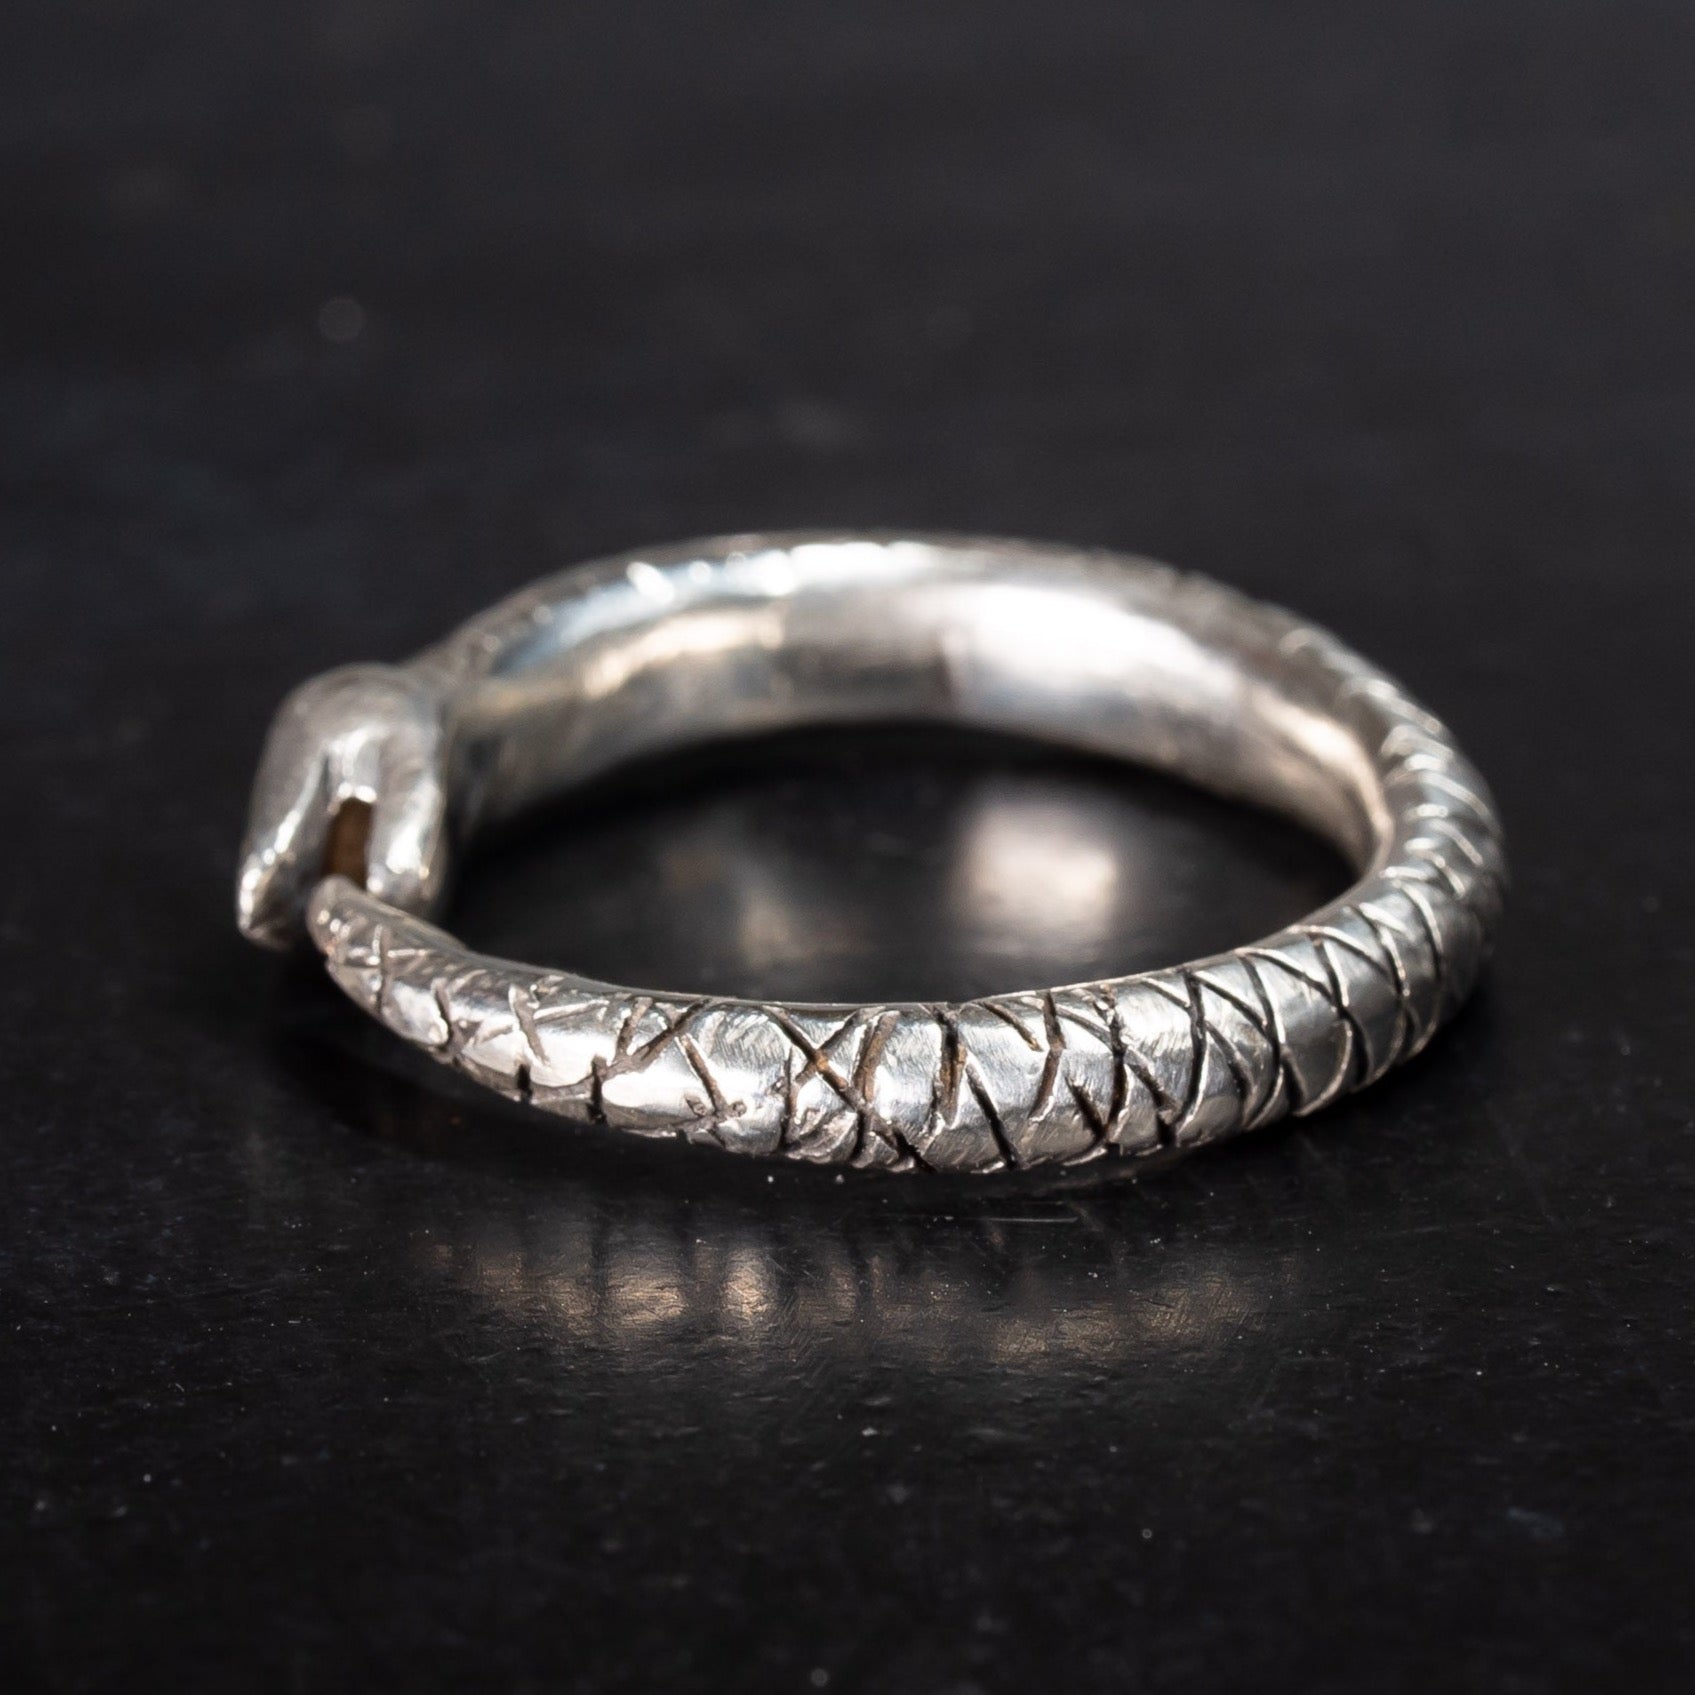 Bonearrow sterling silver snake ring, ouroboros snake eating its own tail on black background